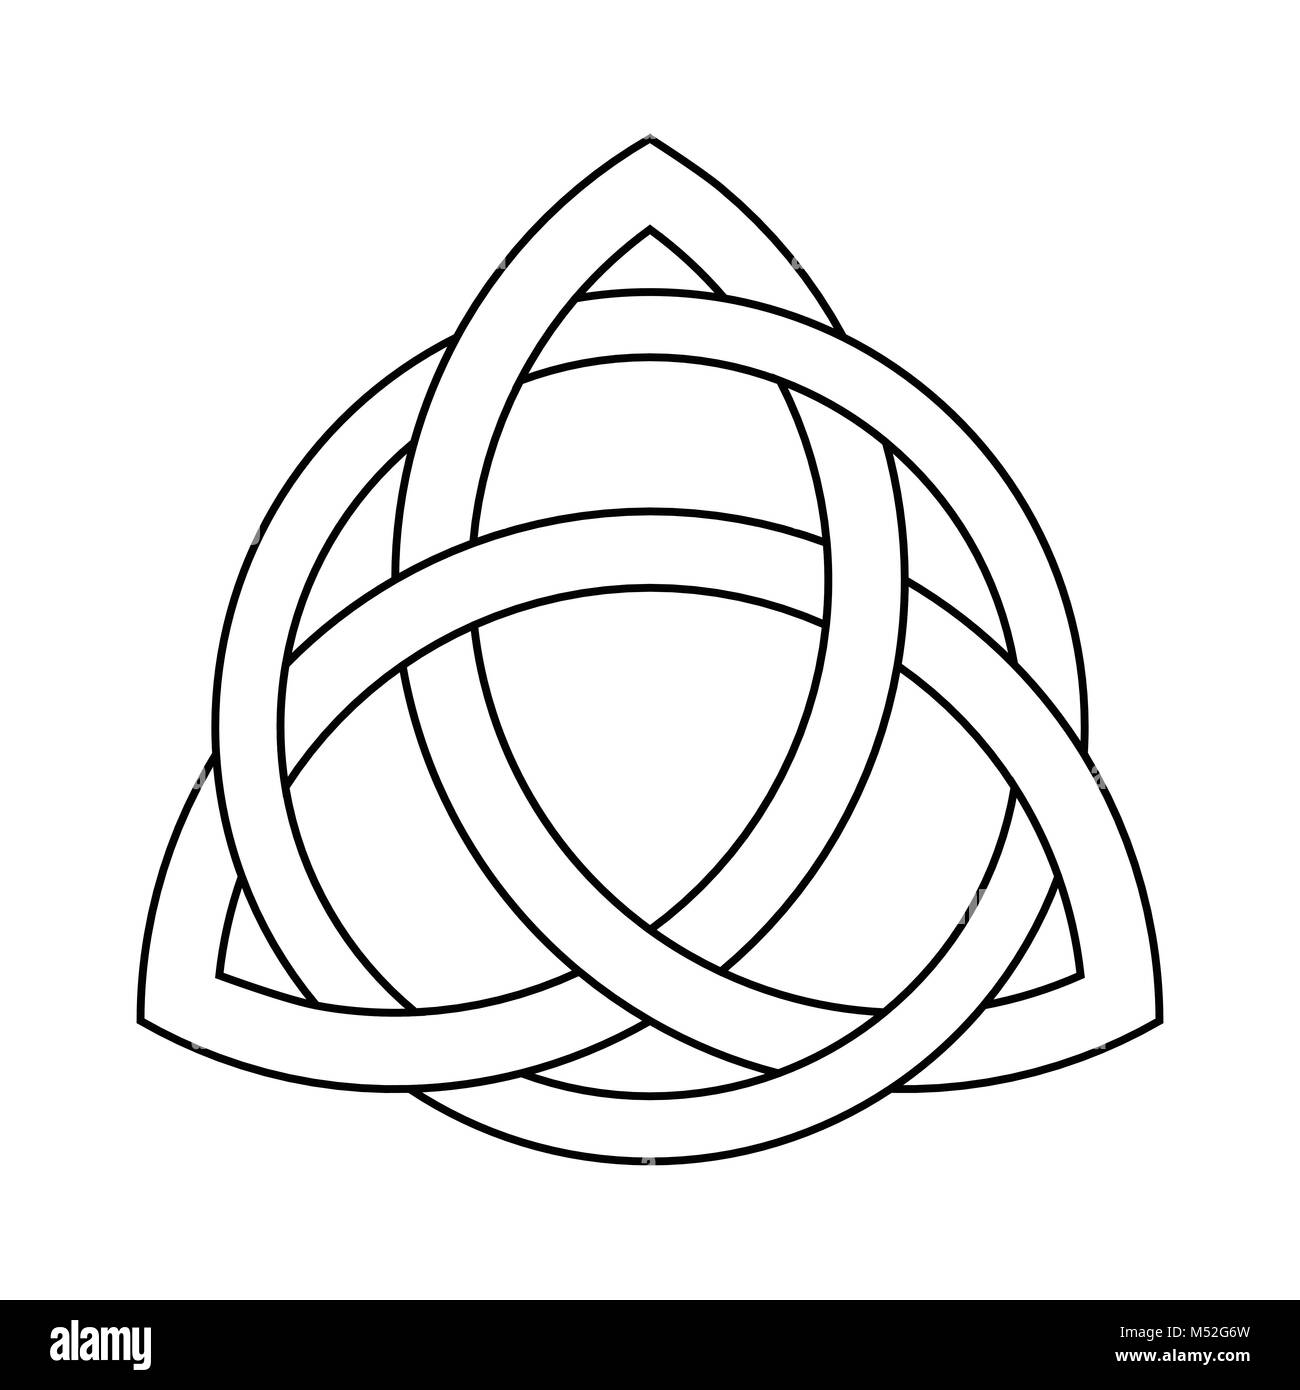 Triquetra ornament with editable fill and stroke colors Stock Vector